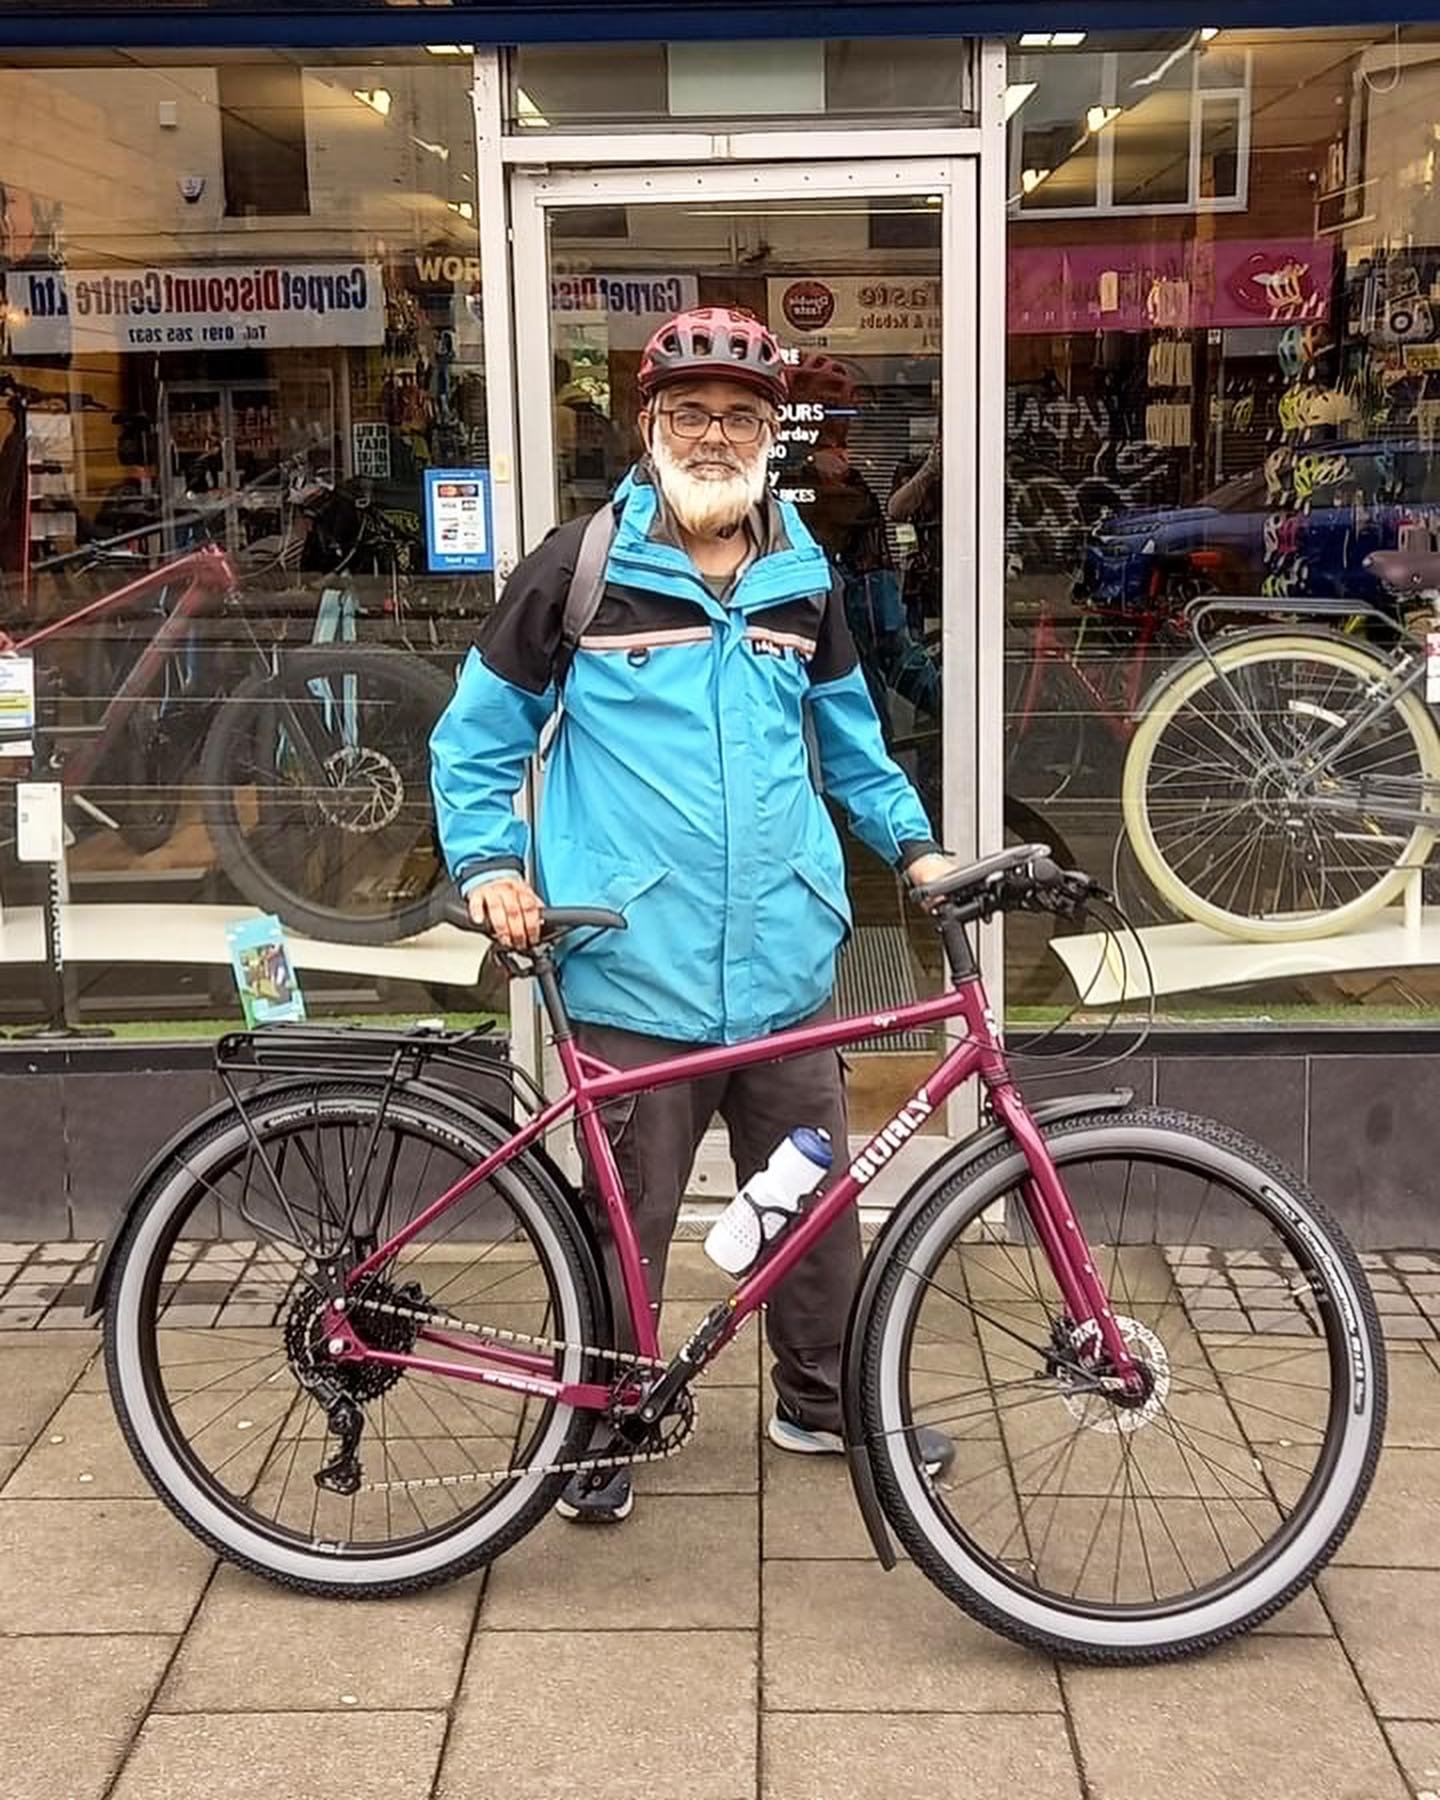 New Surly day!!!! Is there a better day? We don&rsquo;t think so. The Ogre is your go to ATB or off road touring bike with a comfortable position and tackle anything geometry. And it comes in purple!!
@surlybikesuk 
@surlybikes 
#surlyogre #surlybike